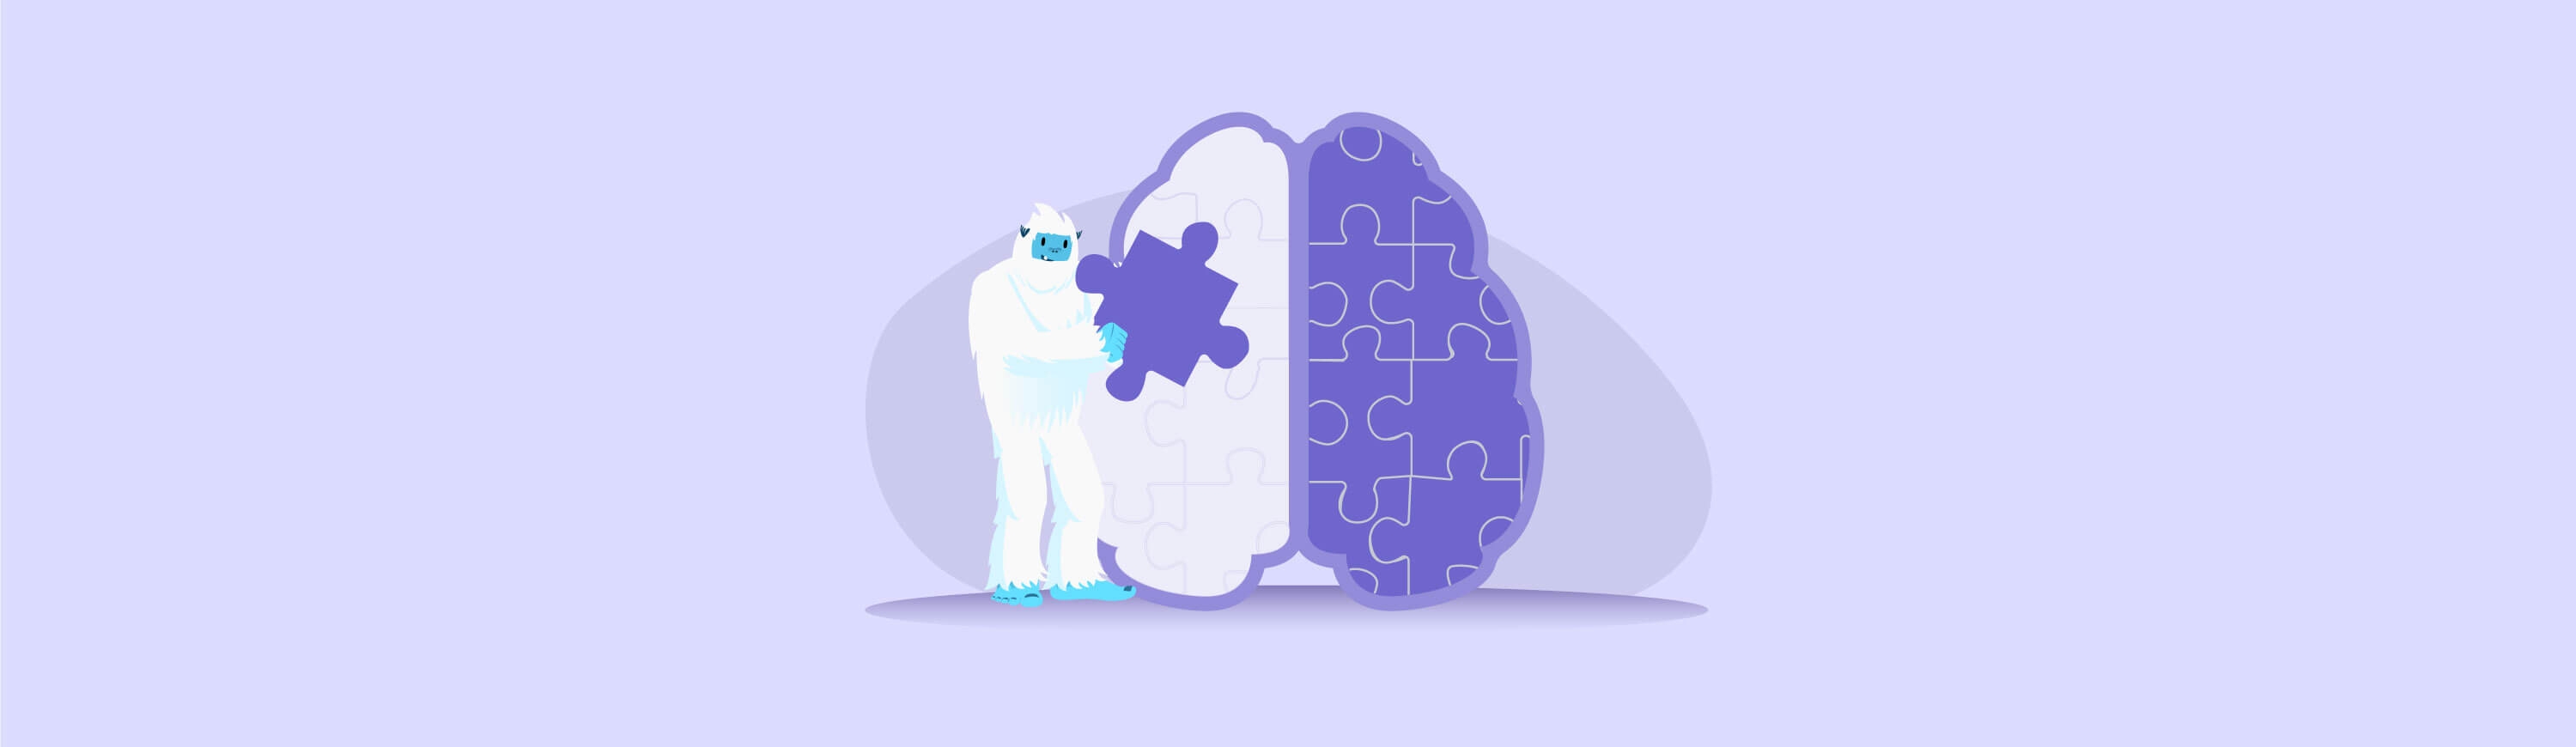 Illustration of Carl the yeti putting puzzle pieces together in the shape of a brain.